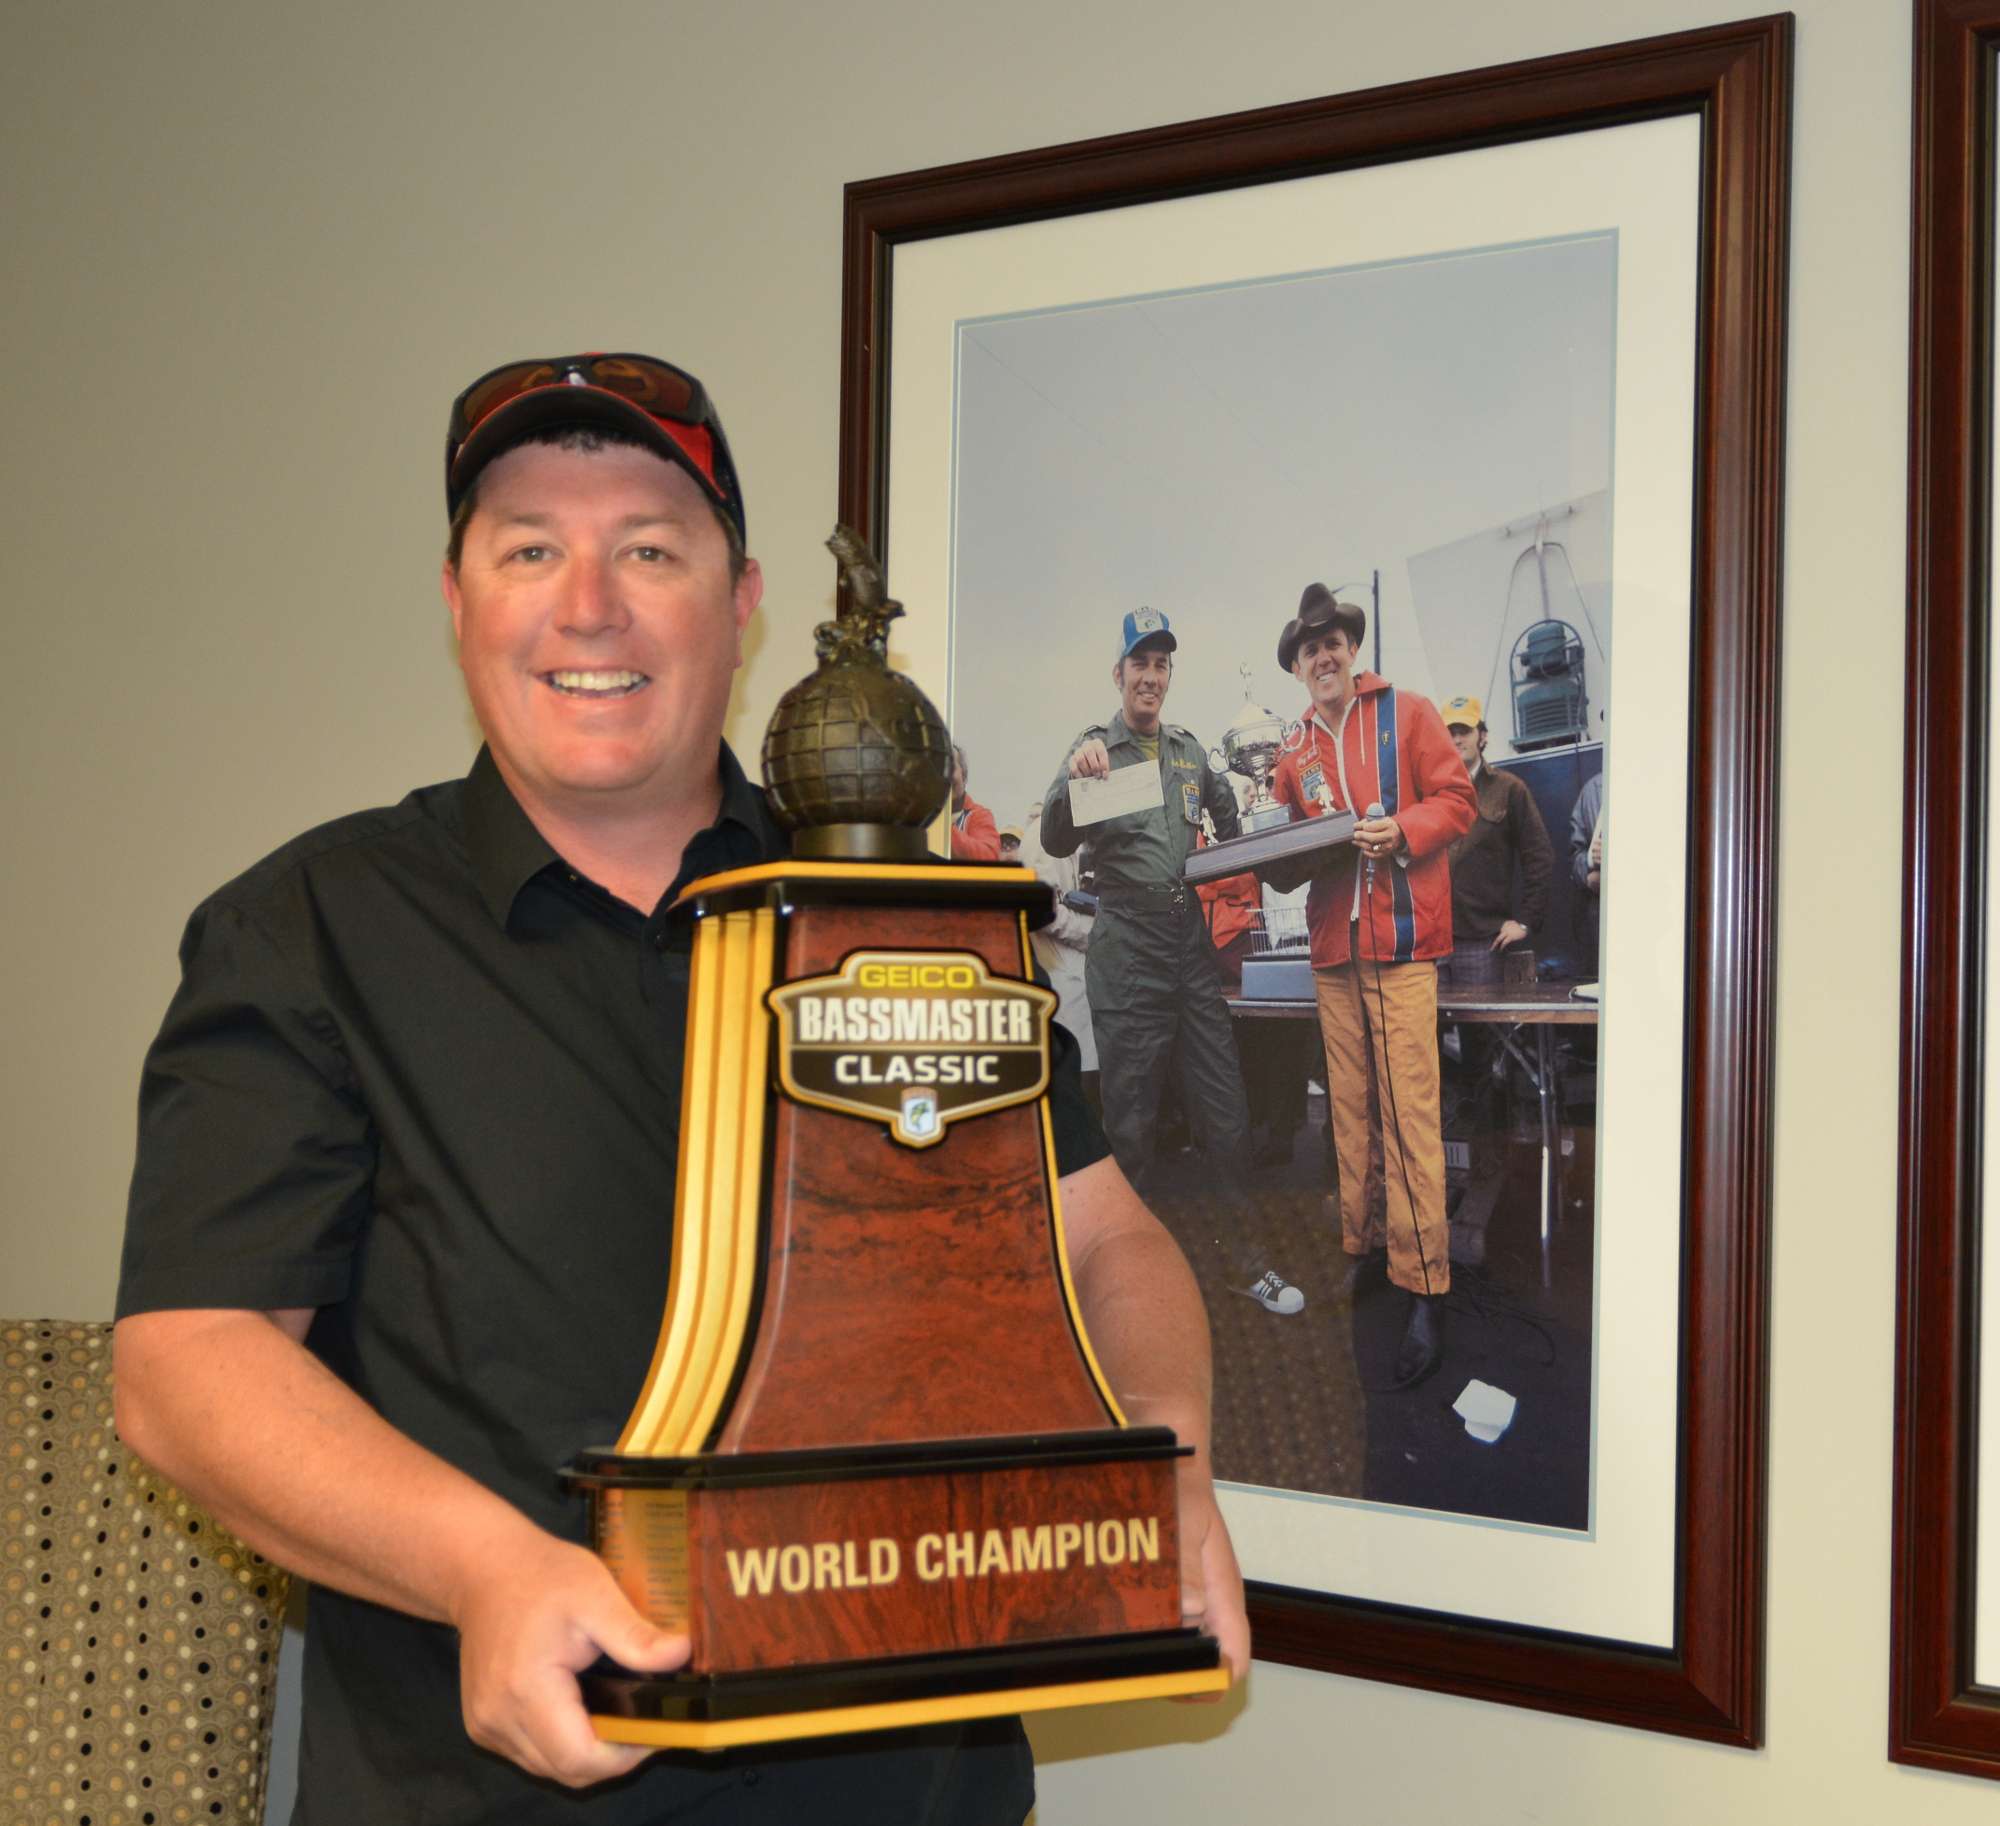 The next day, the Aussies came by the B.A.S.S. headquarters in Birmingham. And no one can resist picking up the Bassmaster Classic trophy when they come into the office.